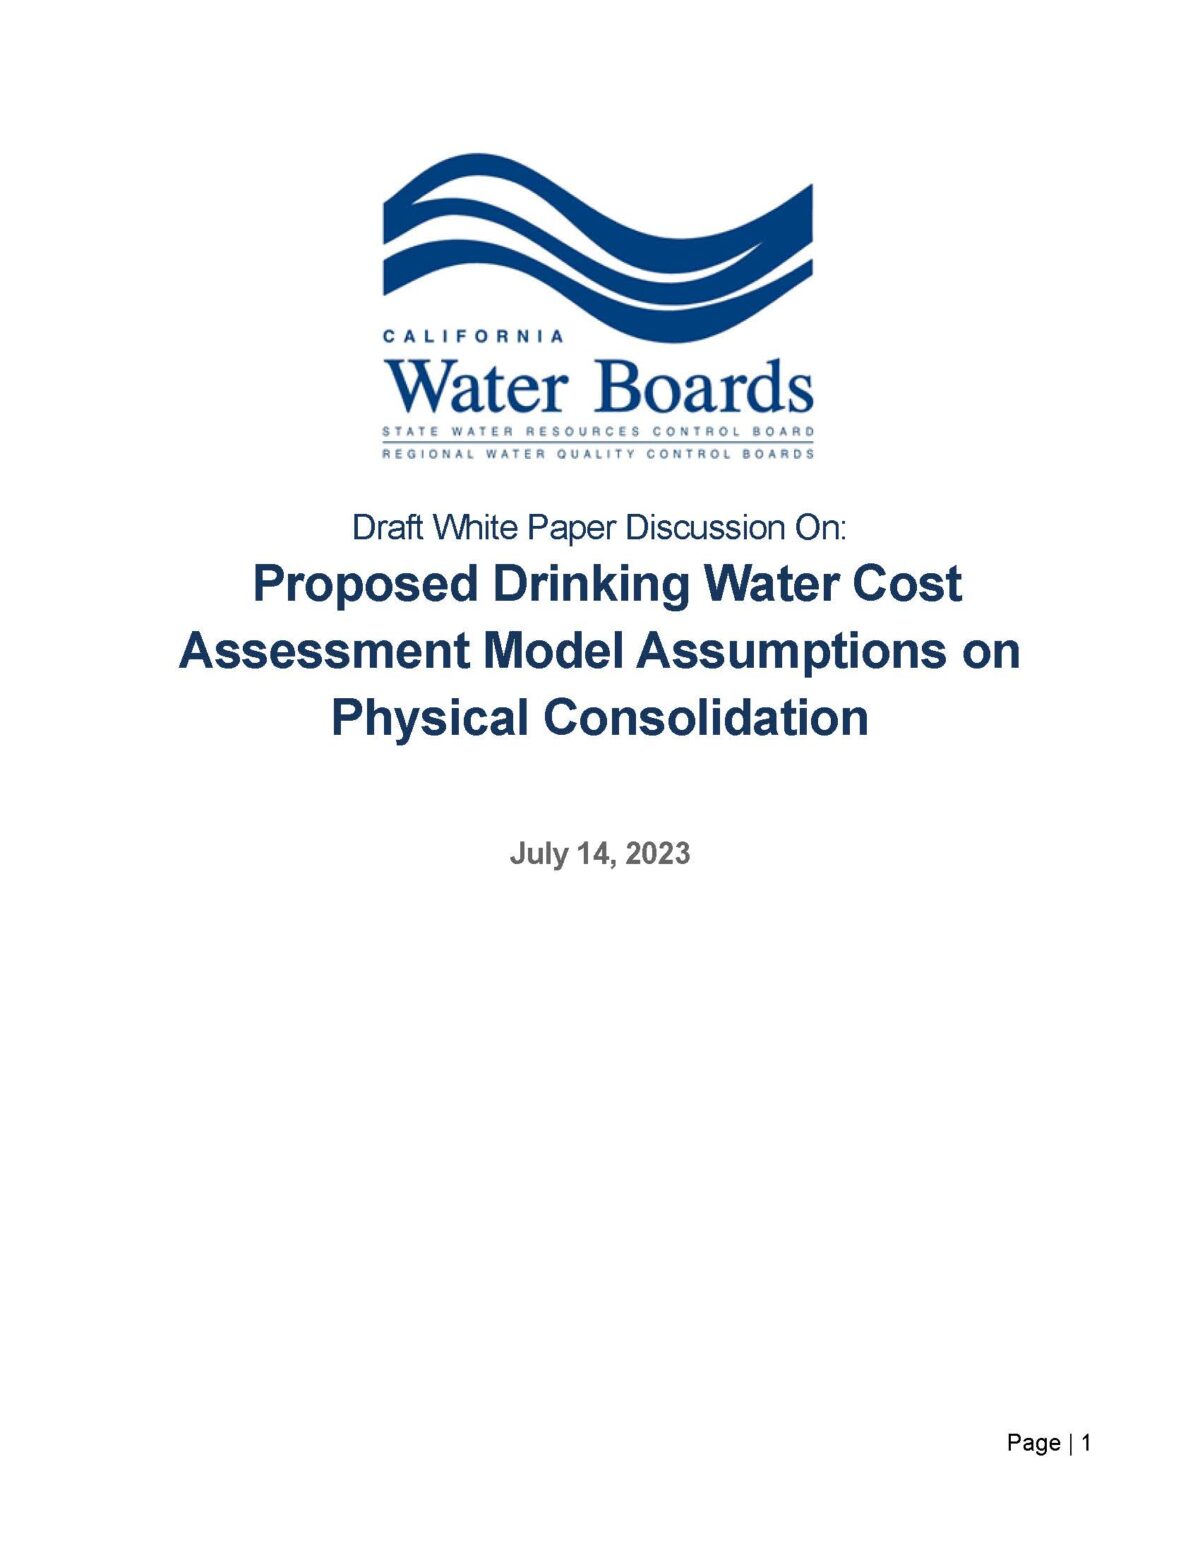 Proposed Drinking Water Cost Assessment Model Assumptions on Physical Consolidation